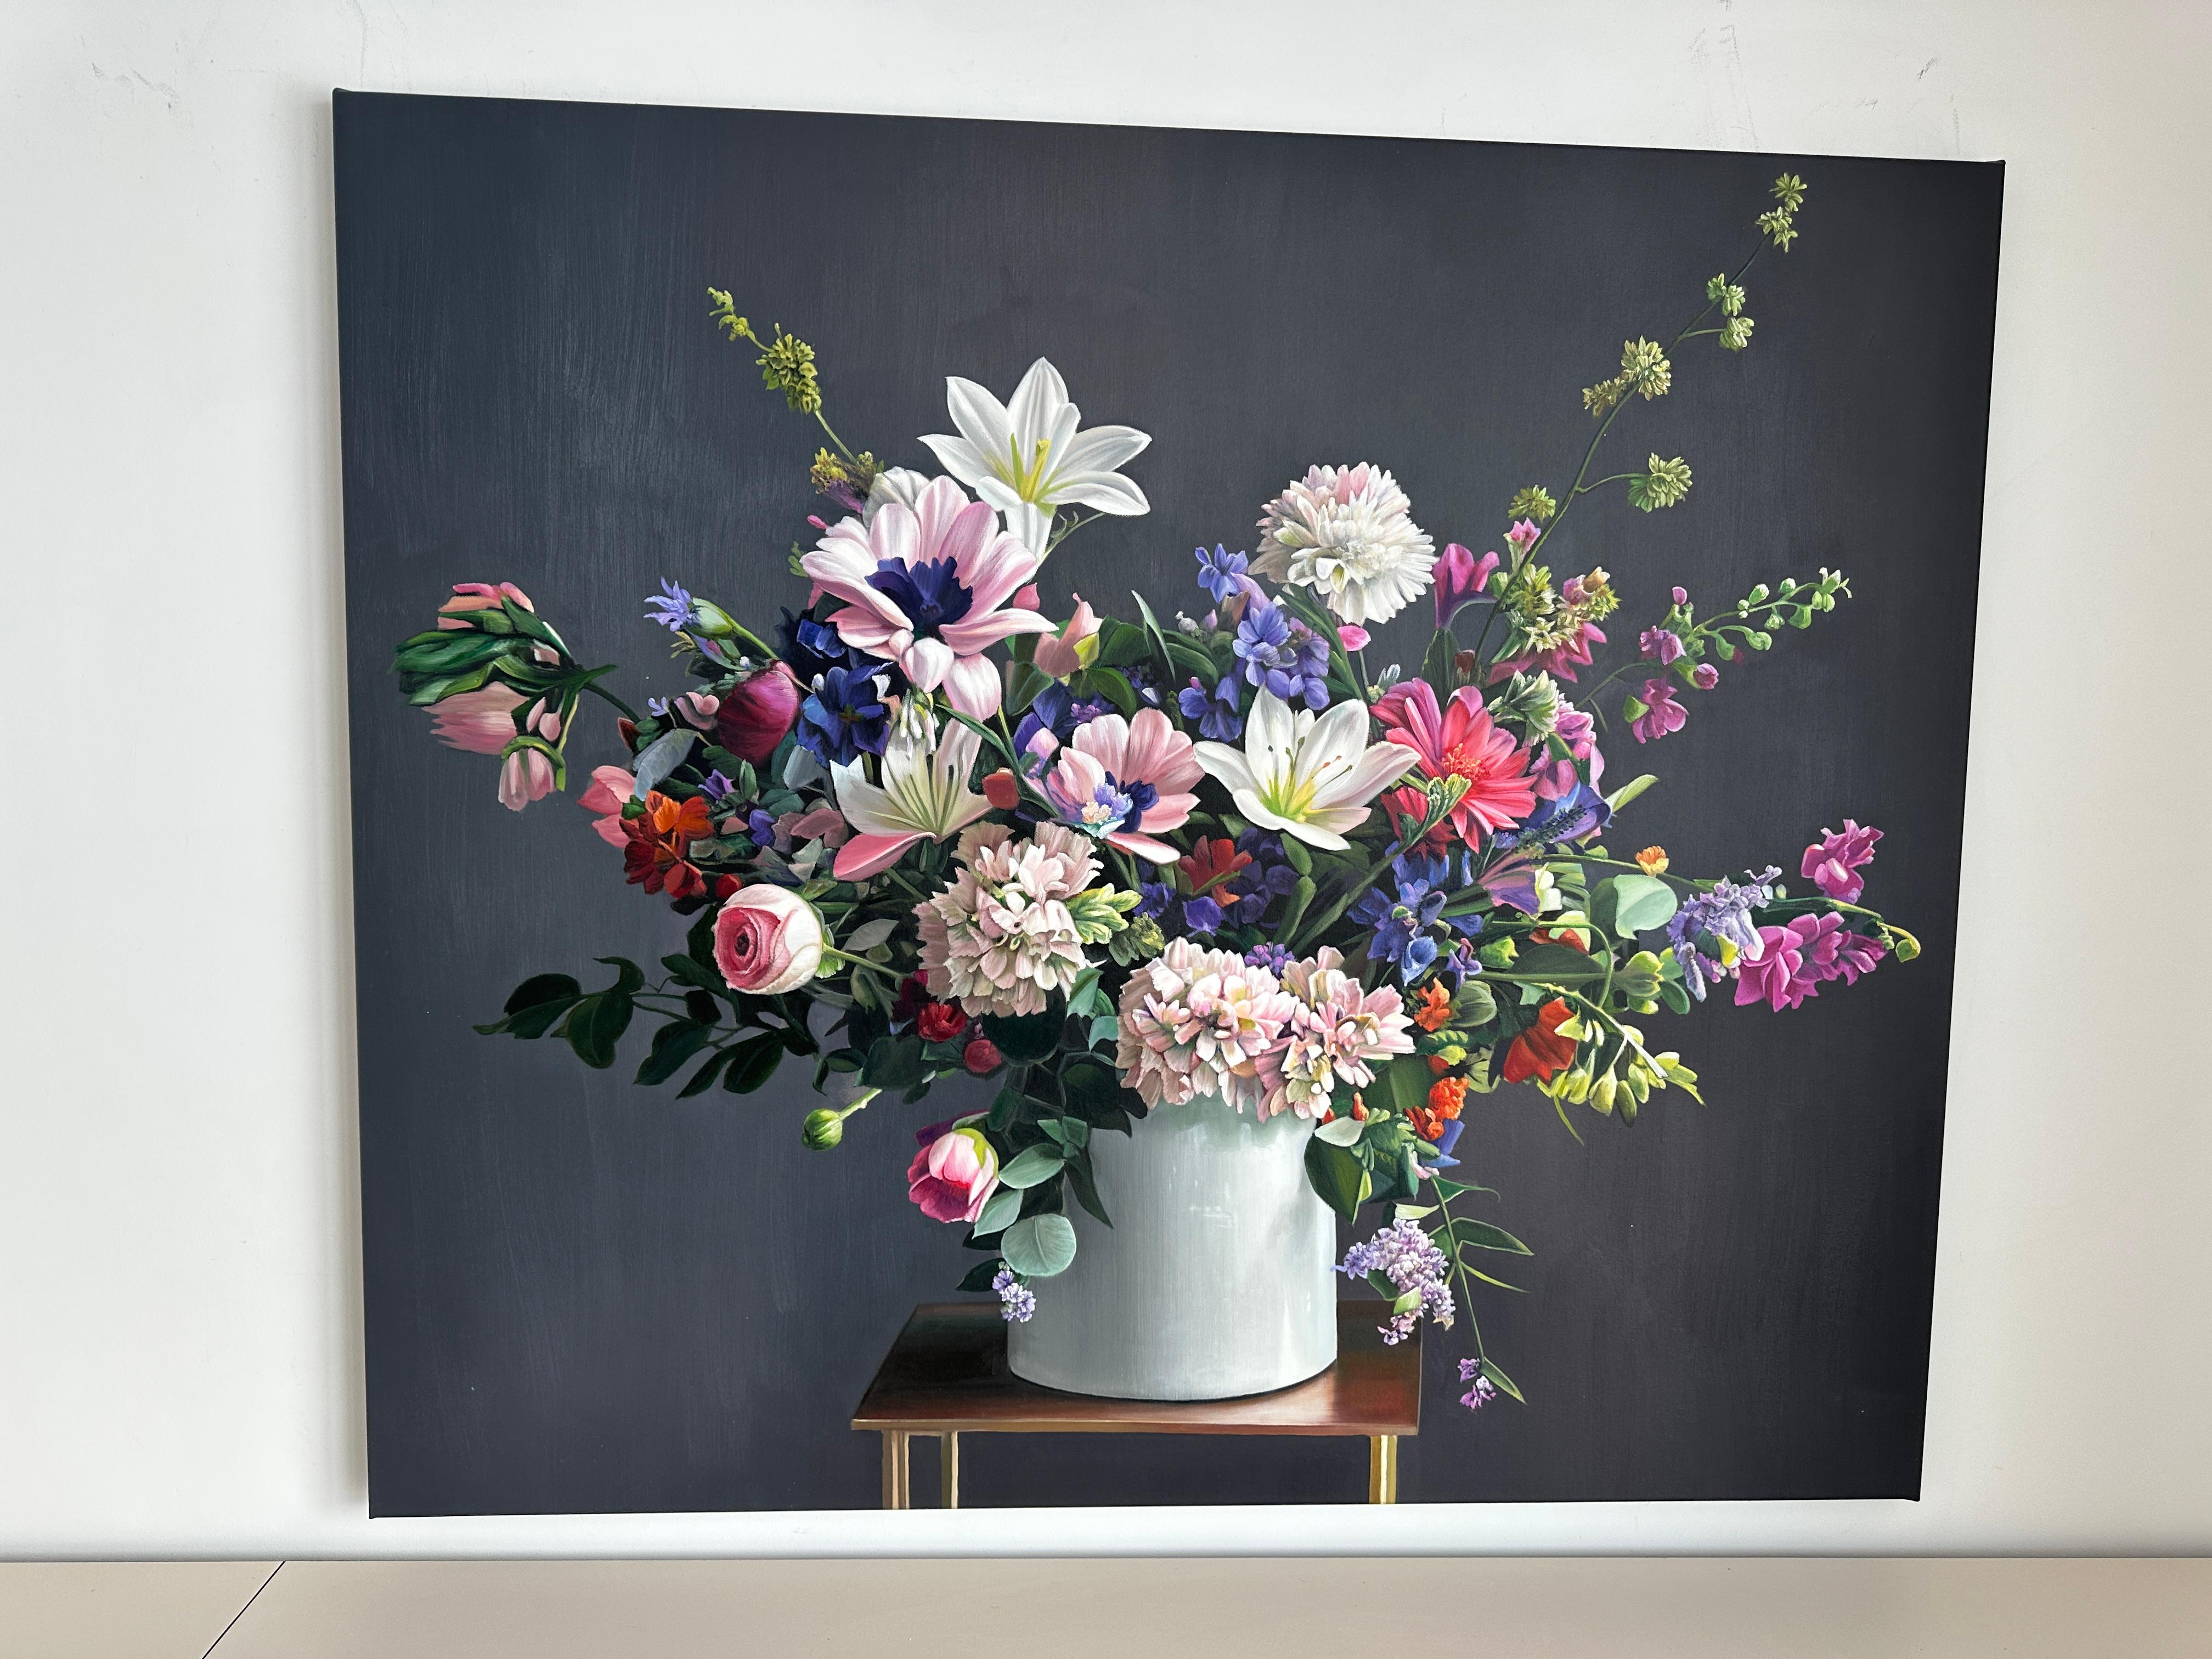 Trough the pale twilit meadow by K Husslein Botanical Hyperrealistic Still life  - Abstract Painting by Katharina Husslein